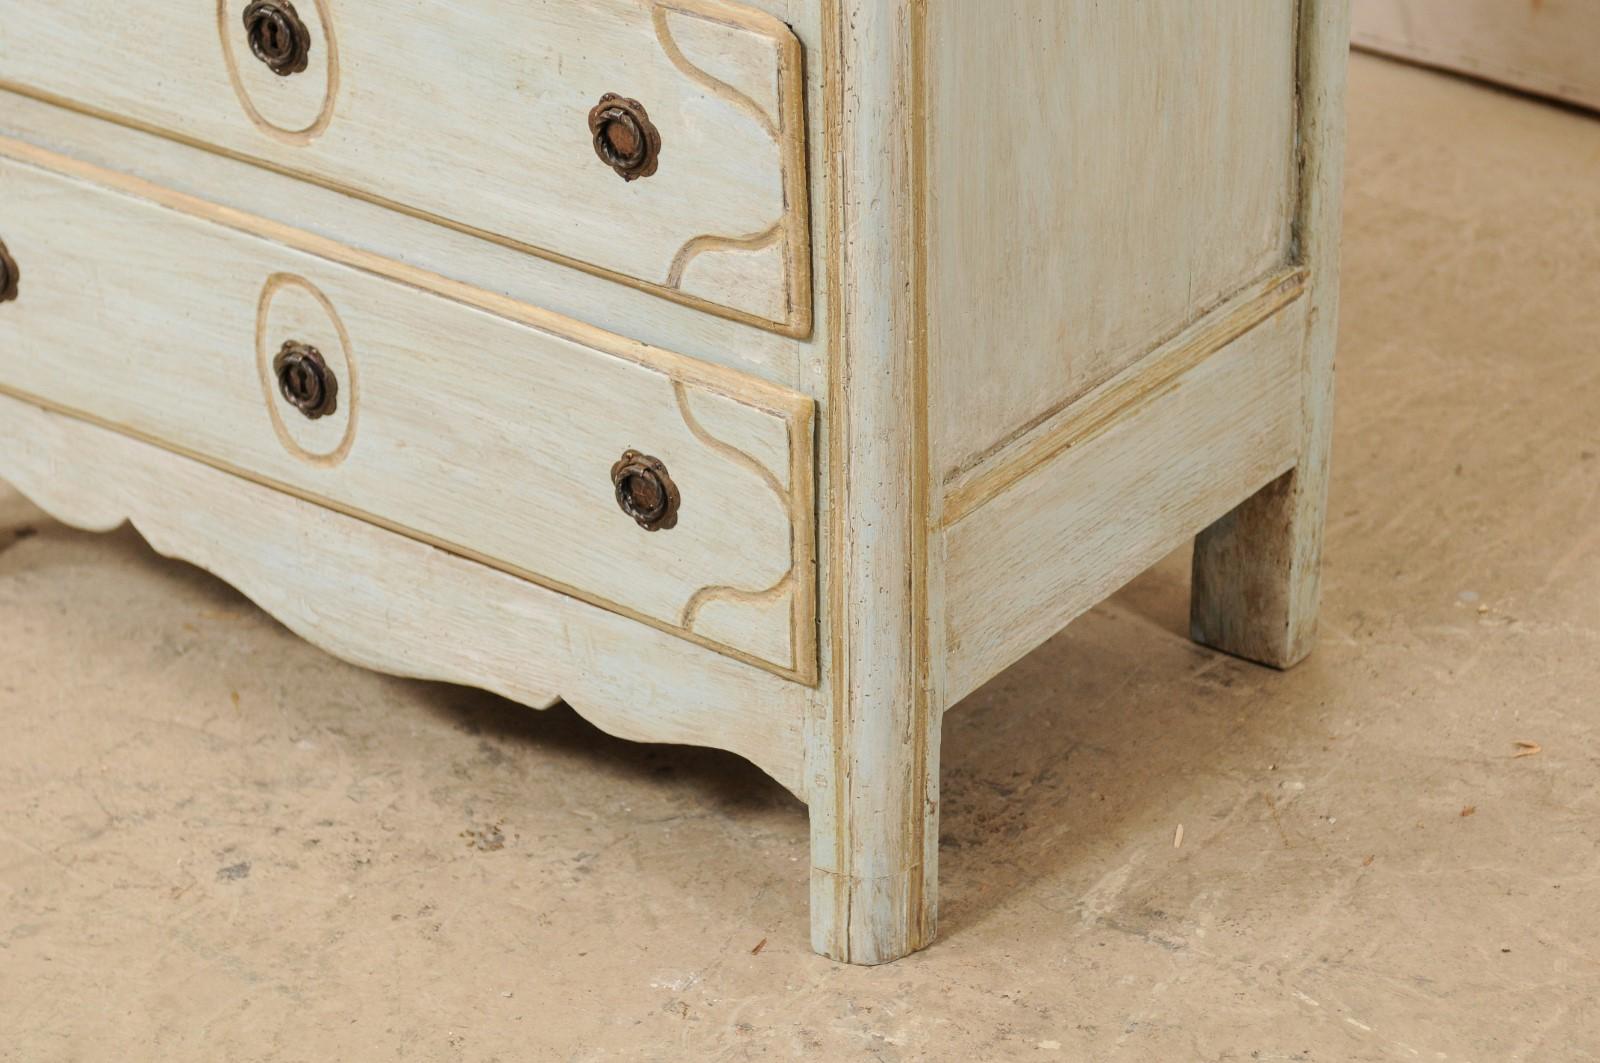 French Petite-Sized Commode in Pale Blue from the Turn of the 18th & 19th C. 1